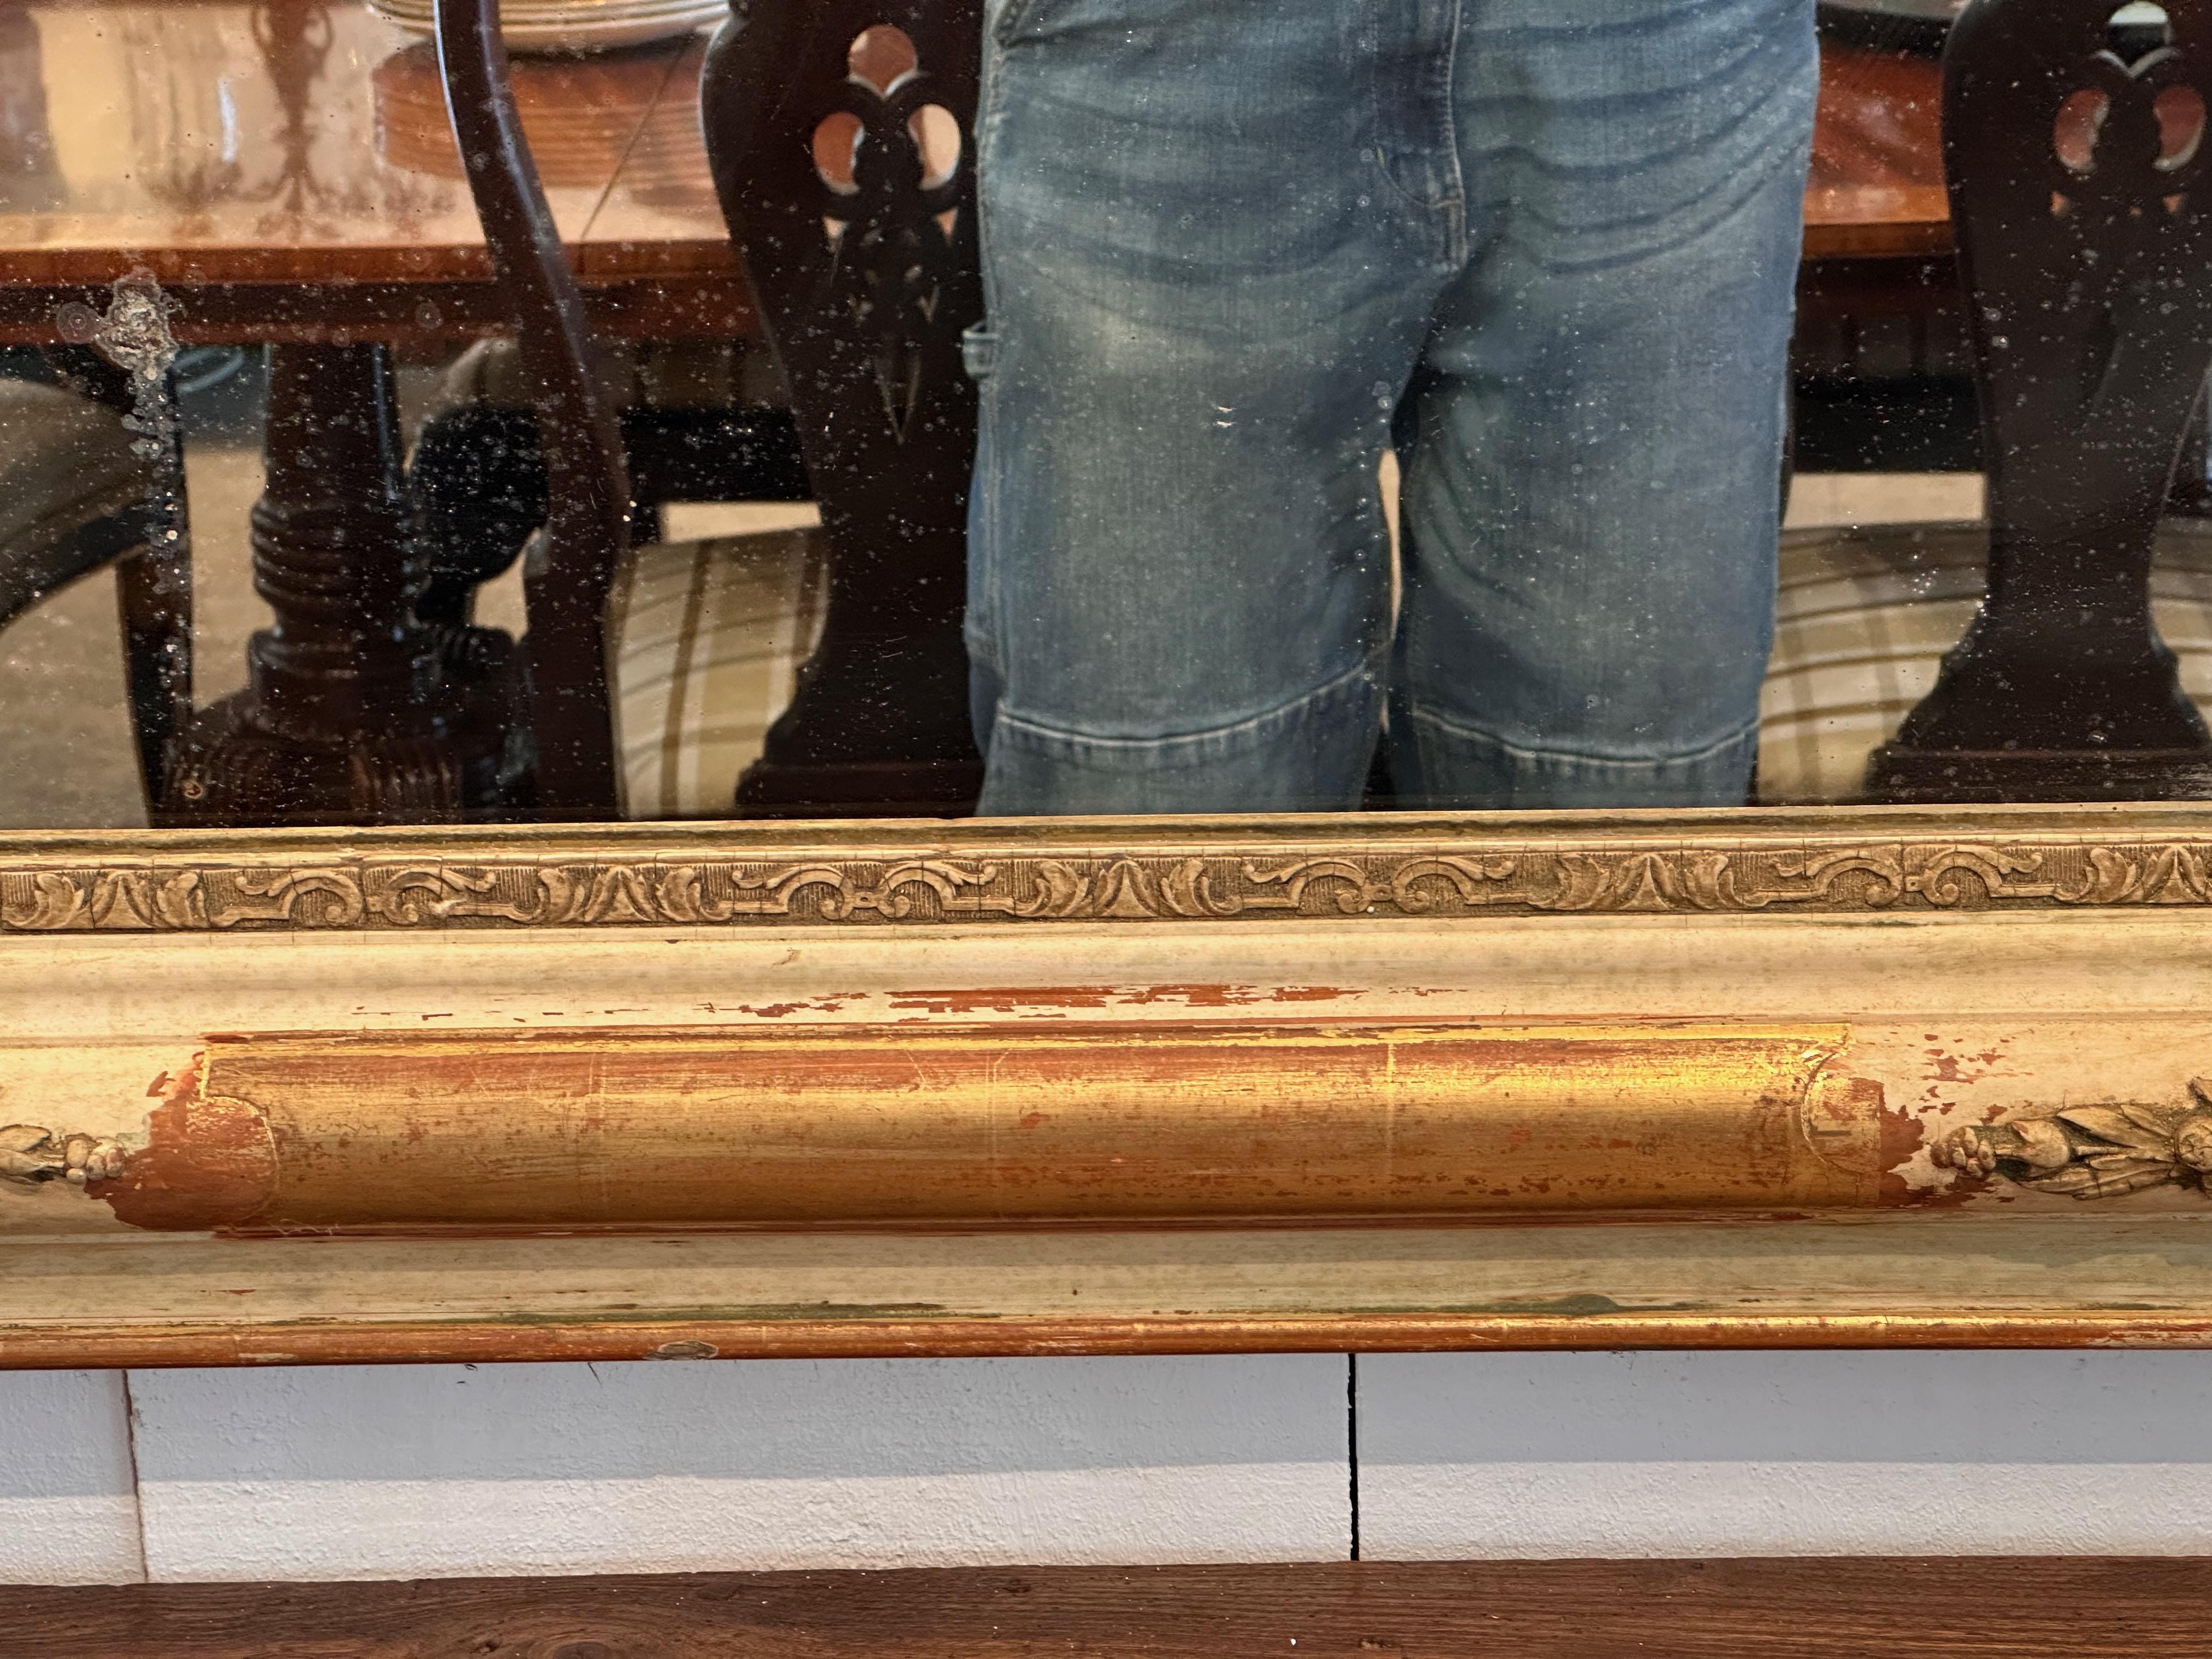 A large Louis Phillippe mirror. Nice relief and color.

